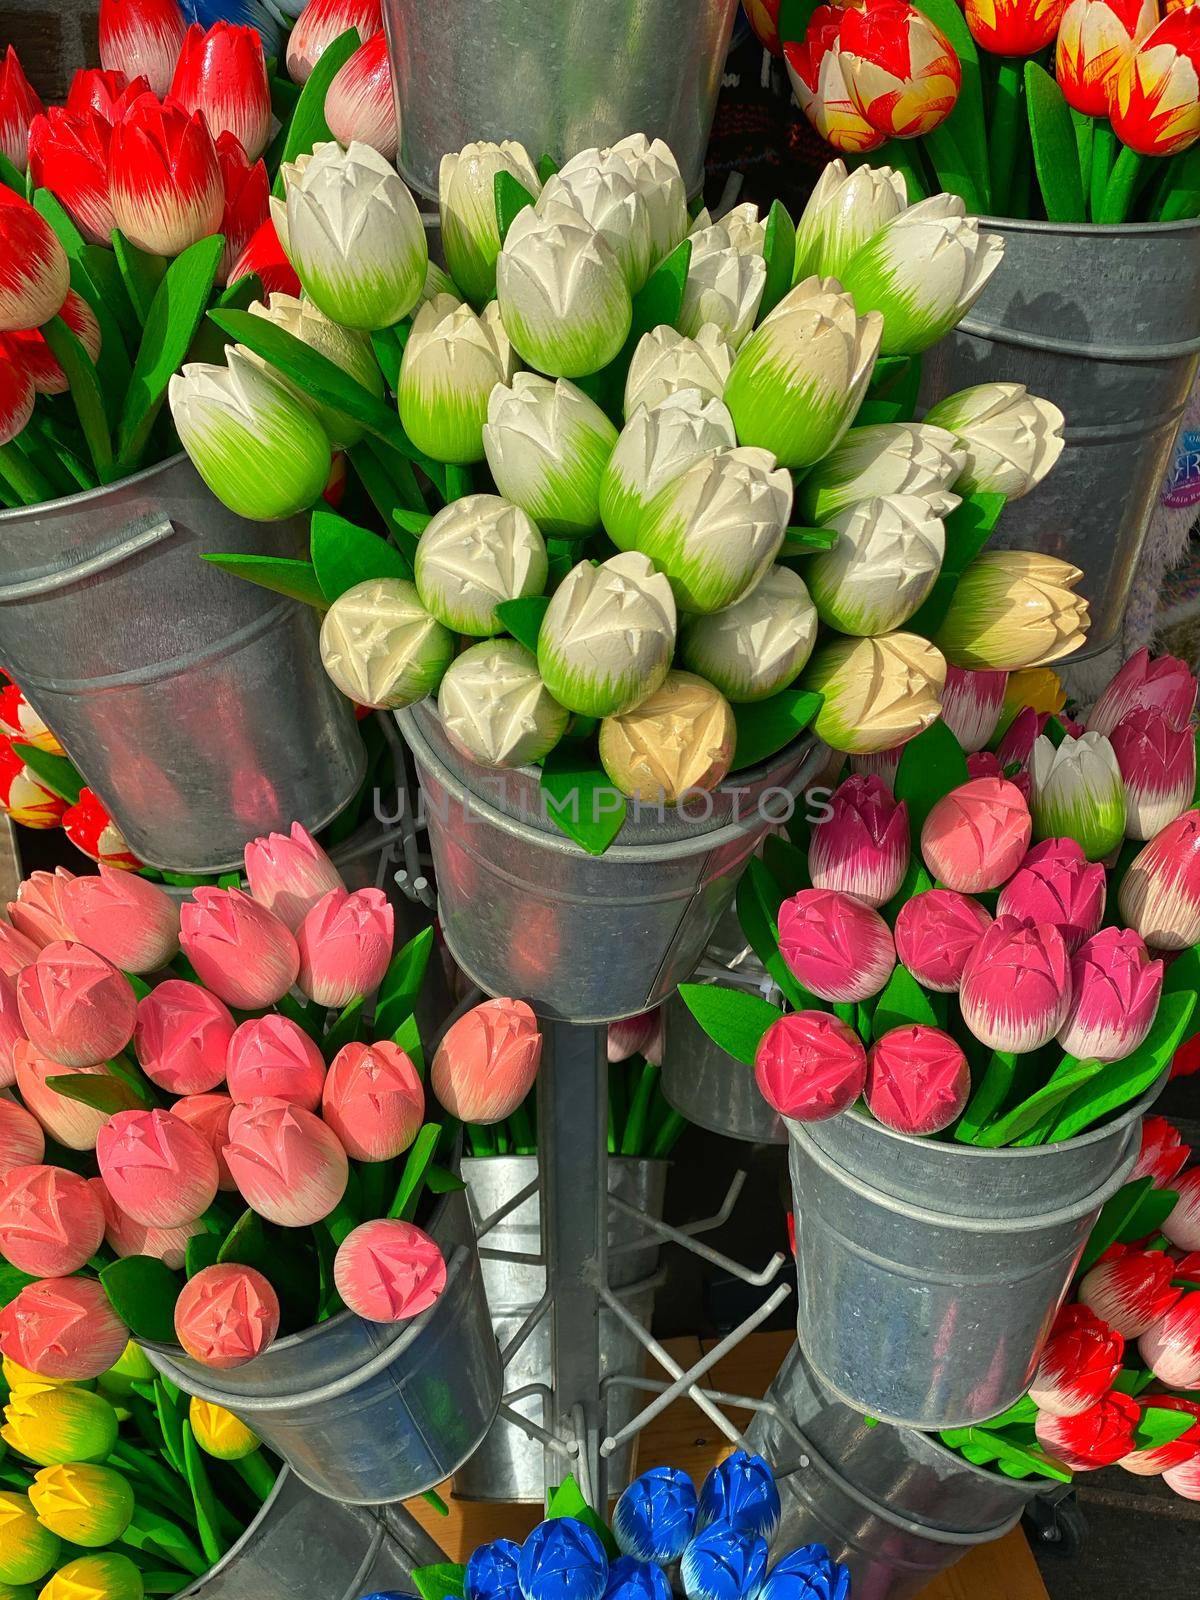 Wooden tulips in the shop in Volendam. Volendam is a town in North Holland, 20 kilometres north of Amsterdam. Sometimes called The pearl of the Zuiderzee.